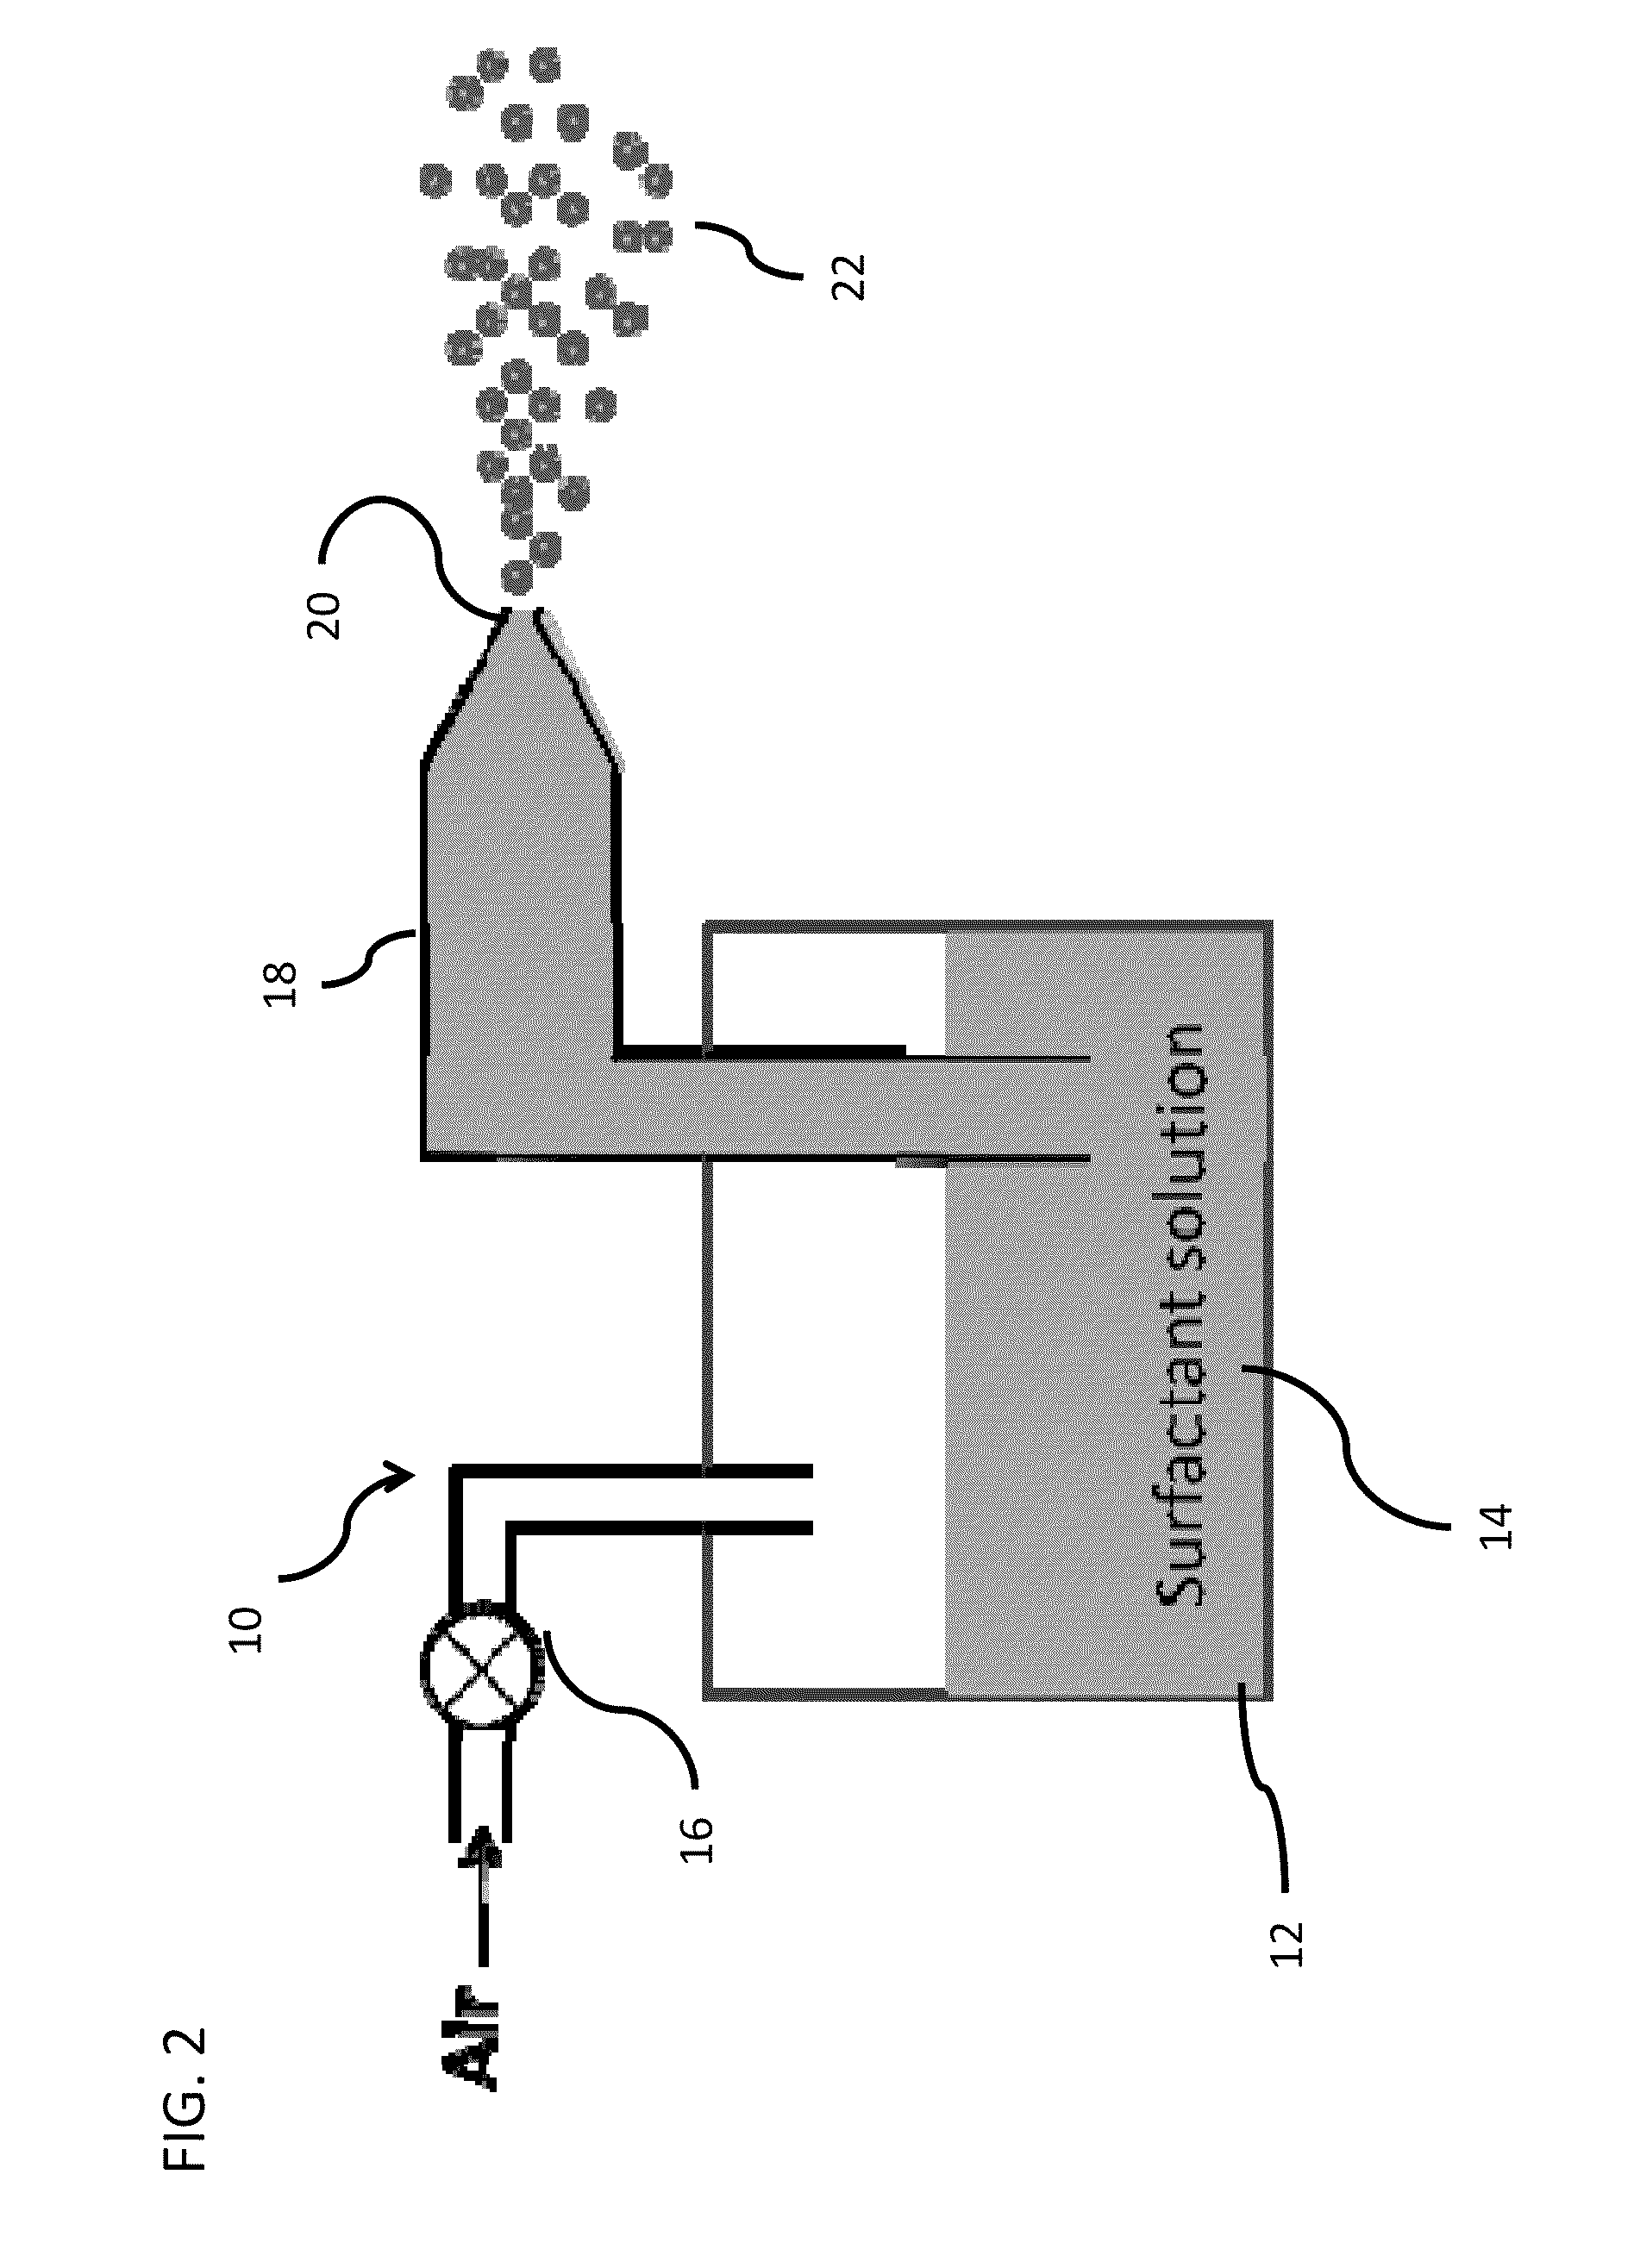 Method to generate micro scale gas filled liquid bubbles as tracer particles or inhaler mist for drug delivery